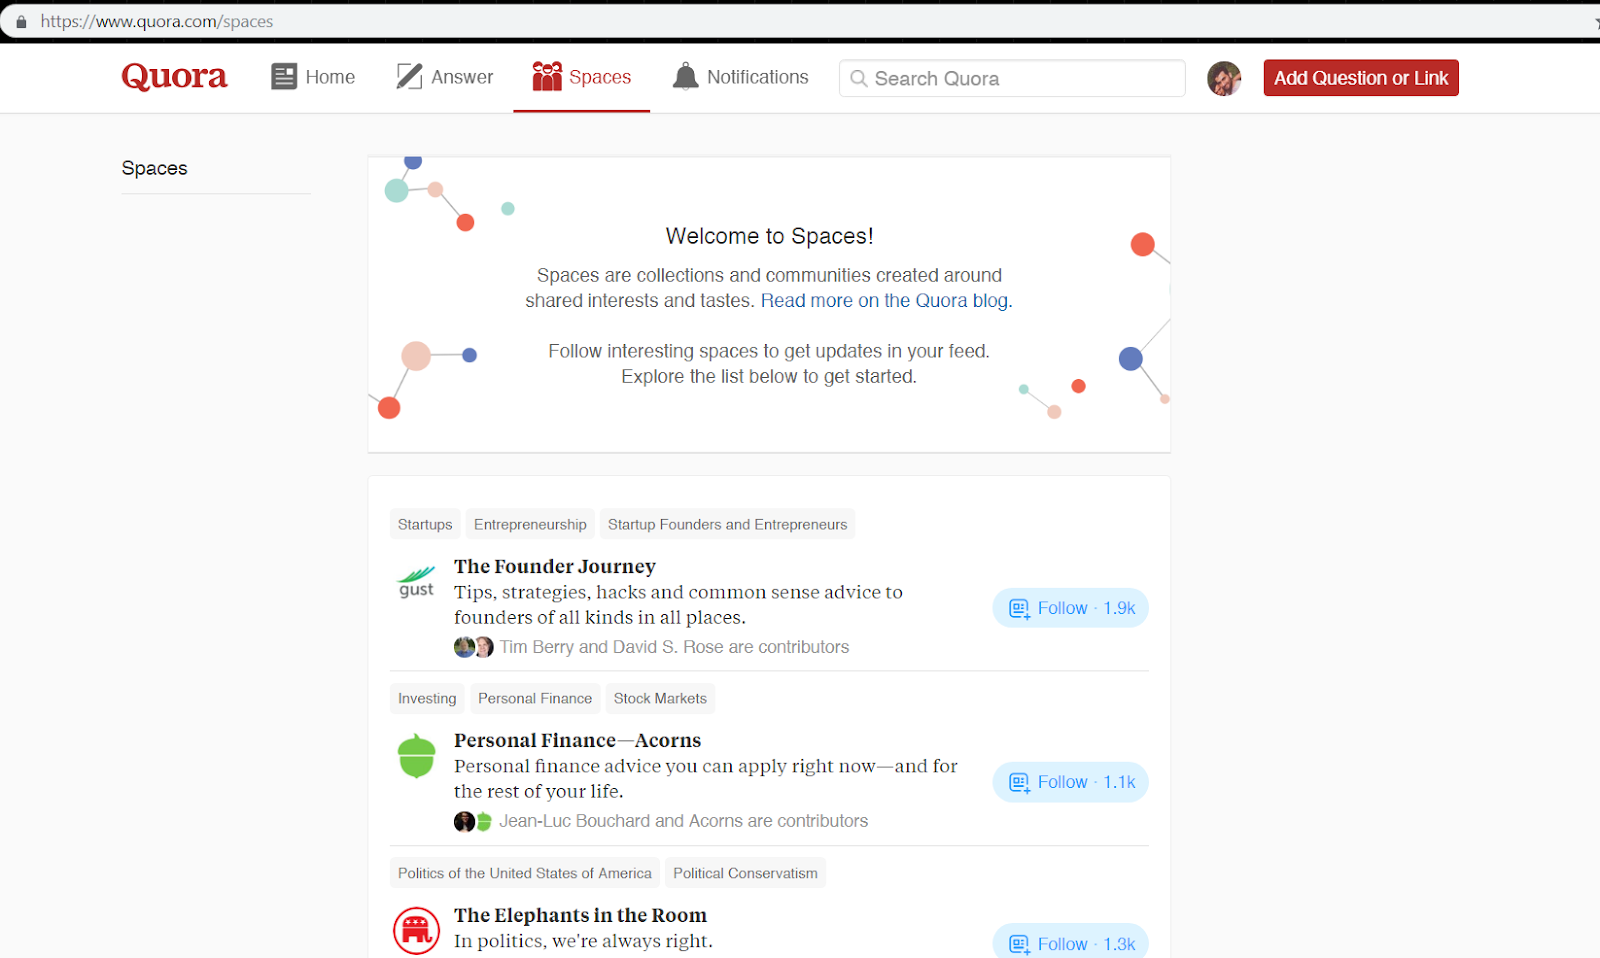 Spaces: The New Quora Feature Everyone is Talking About